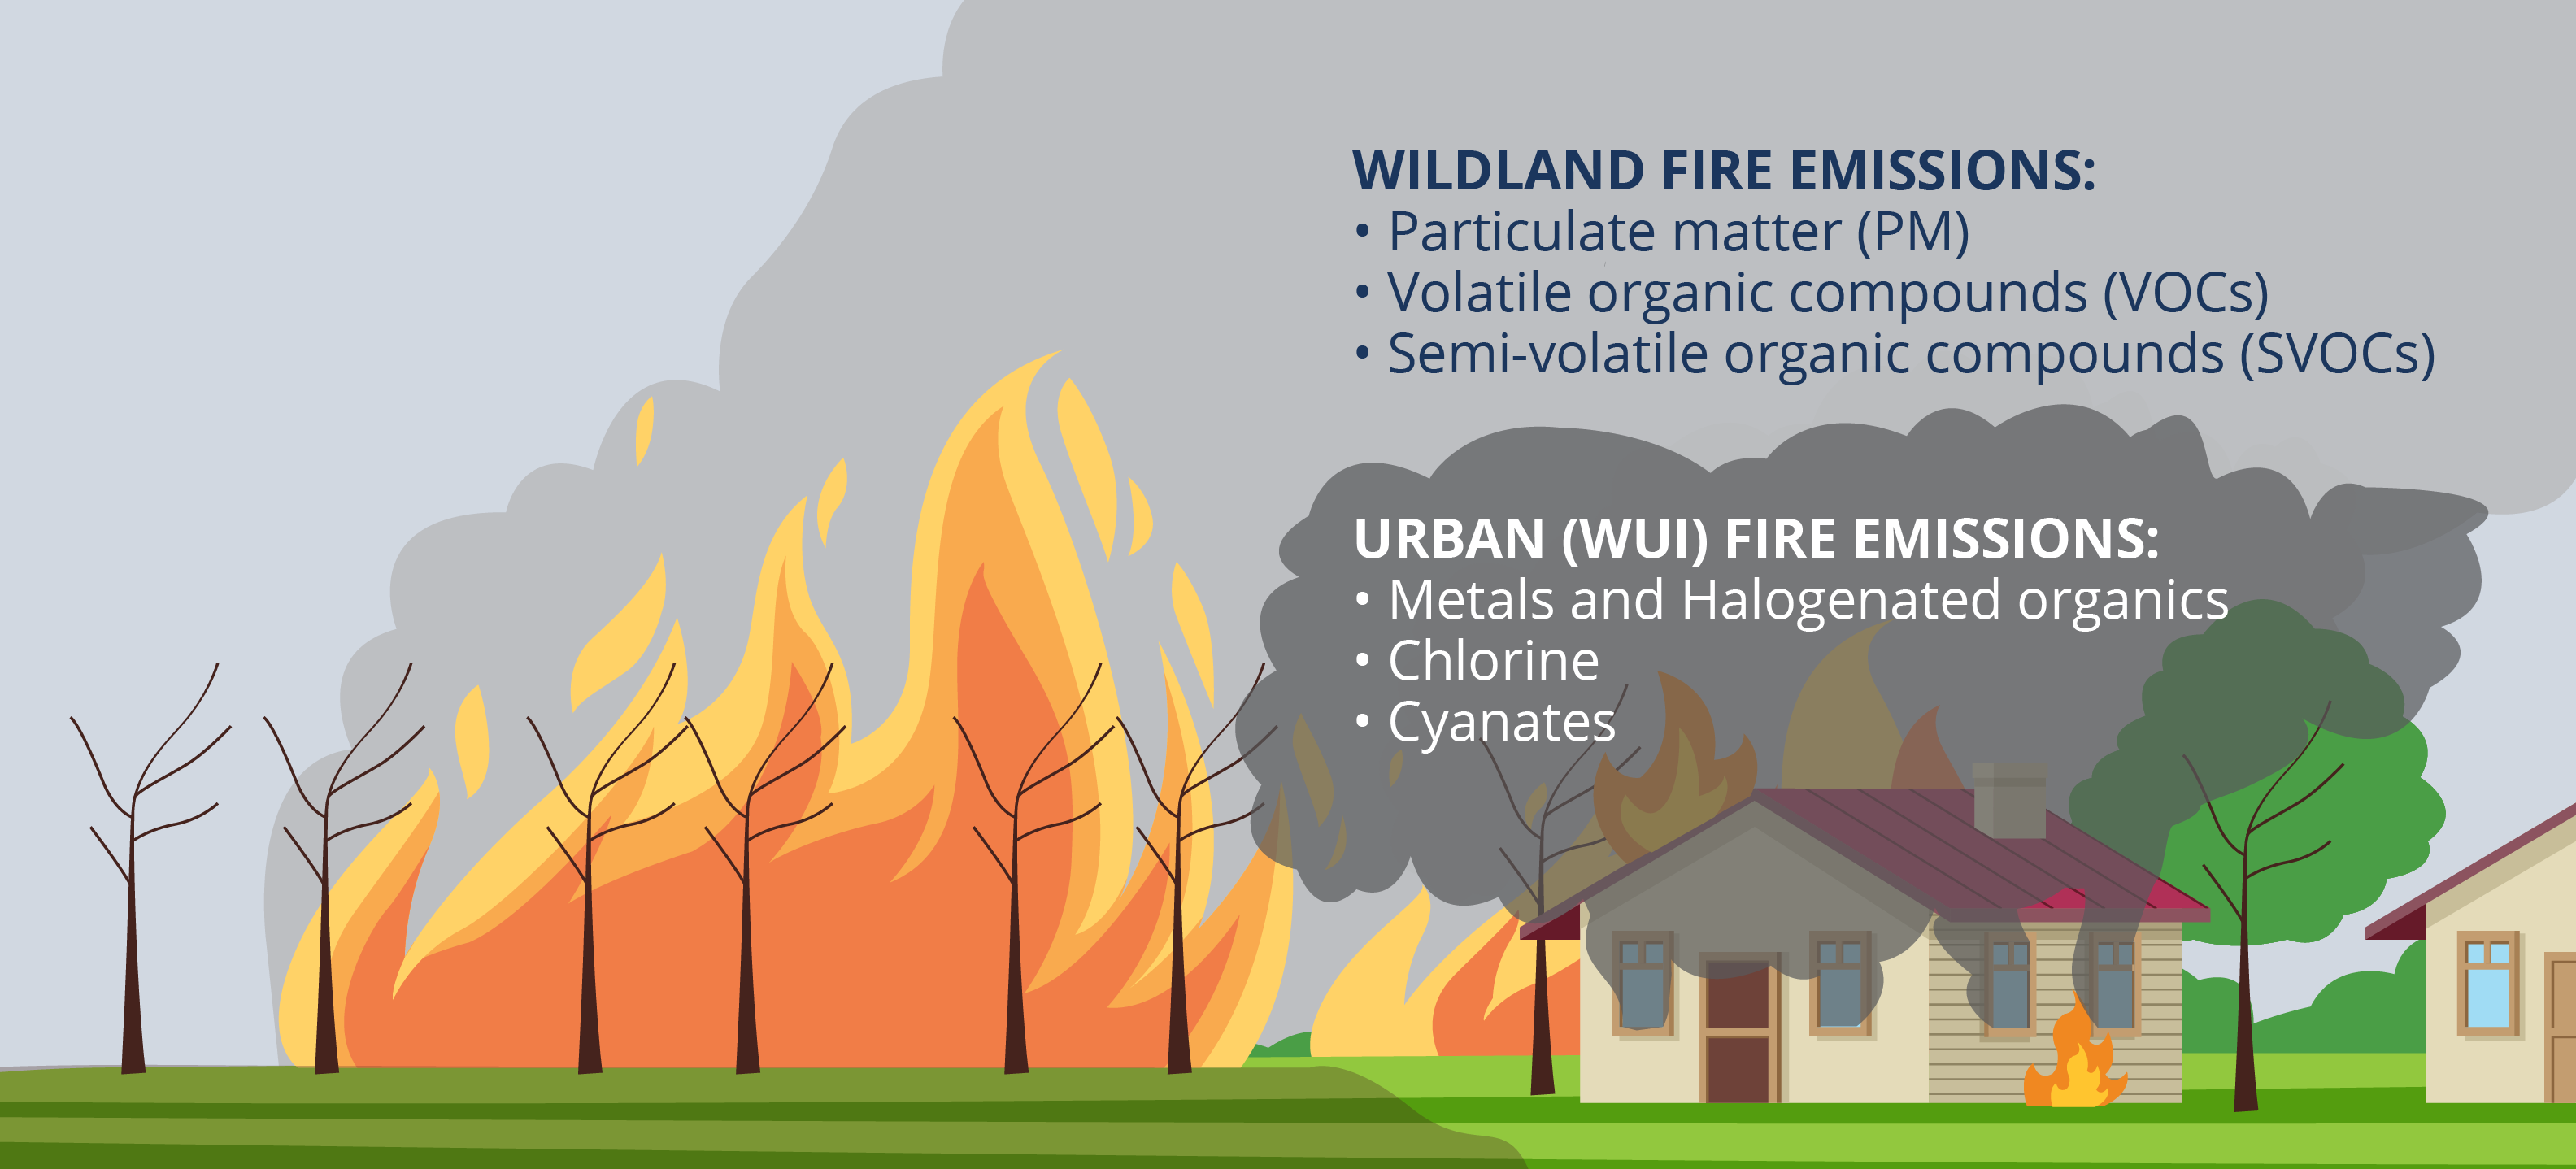 Graphic describing the difference between the chemical emissions in wildland fires and WUI fires